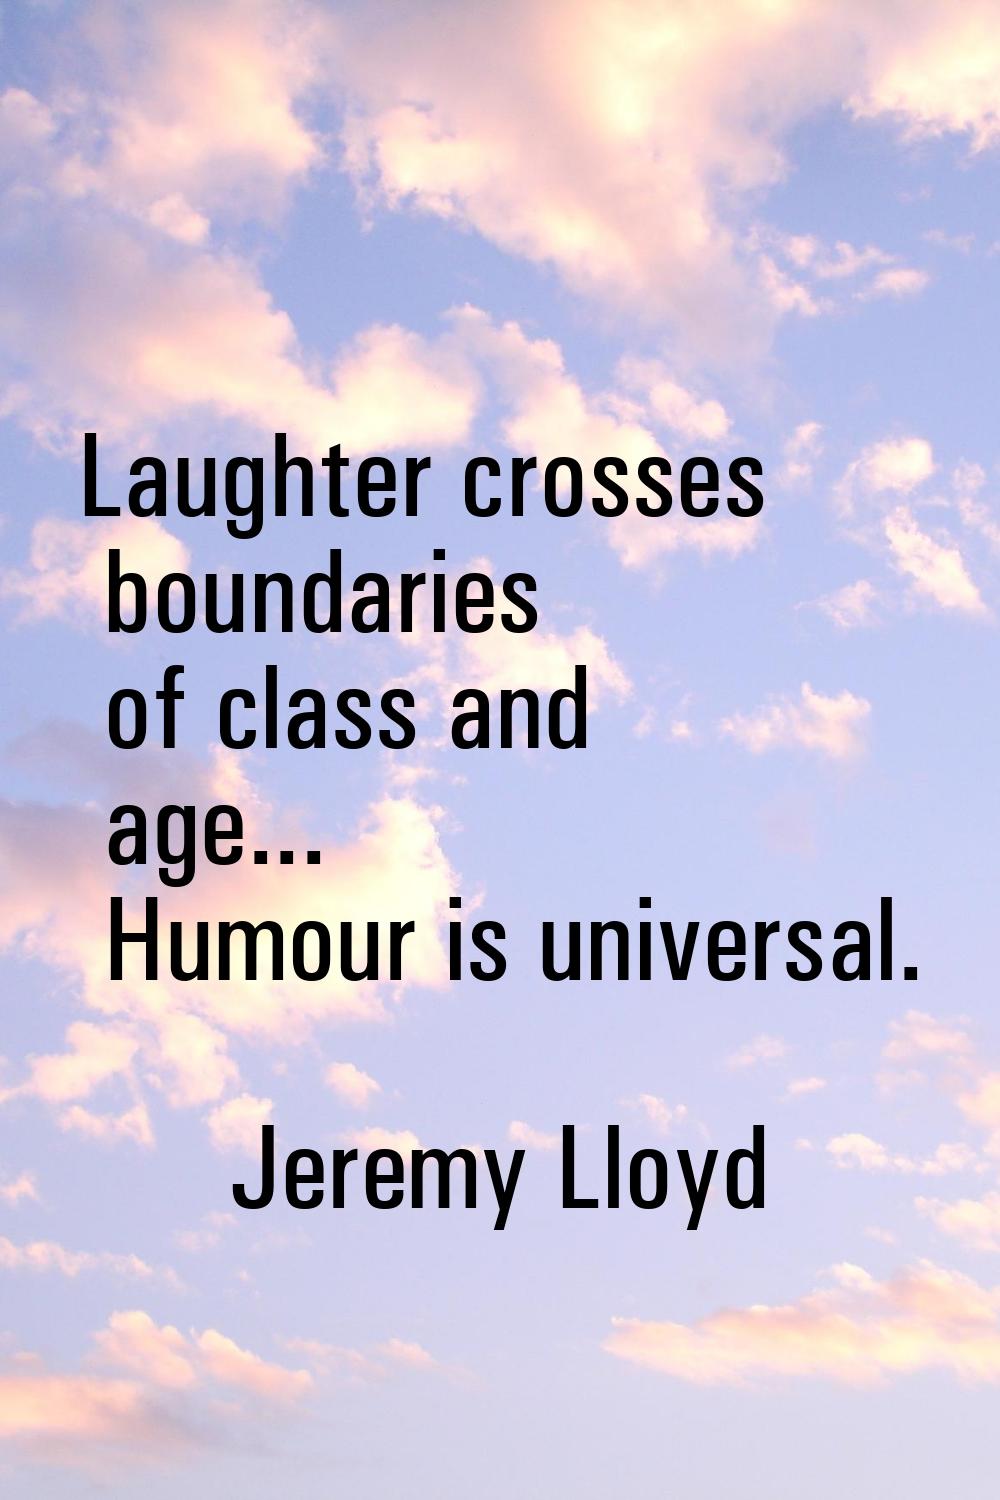 Laughter crosses boundaries of class and age... Humour is universal.